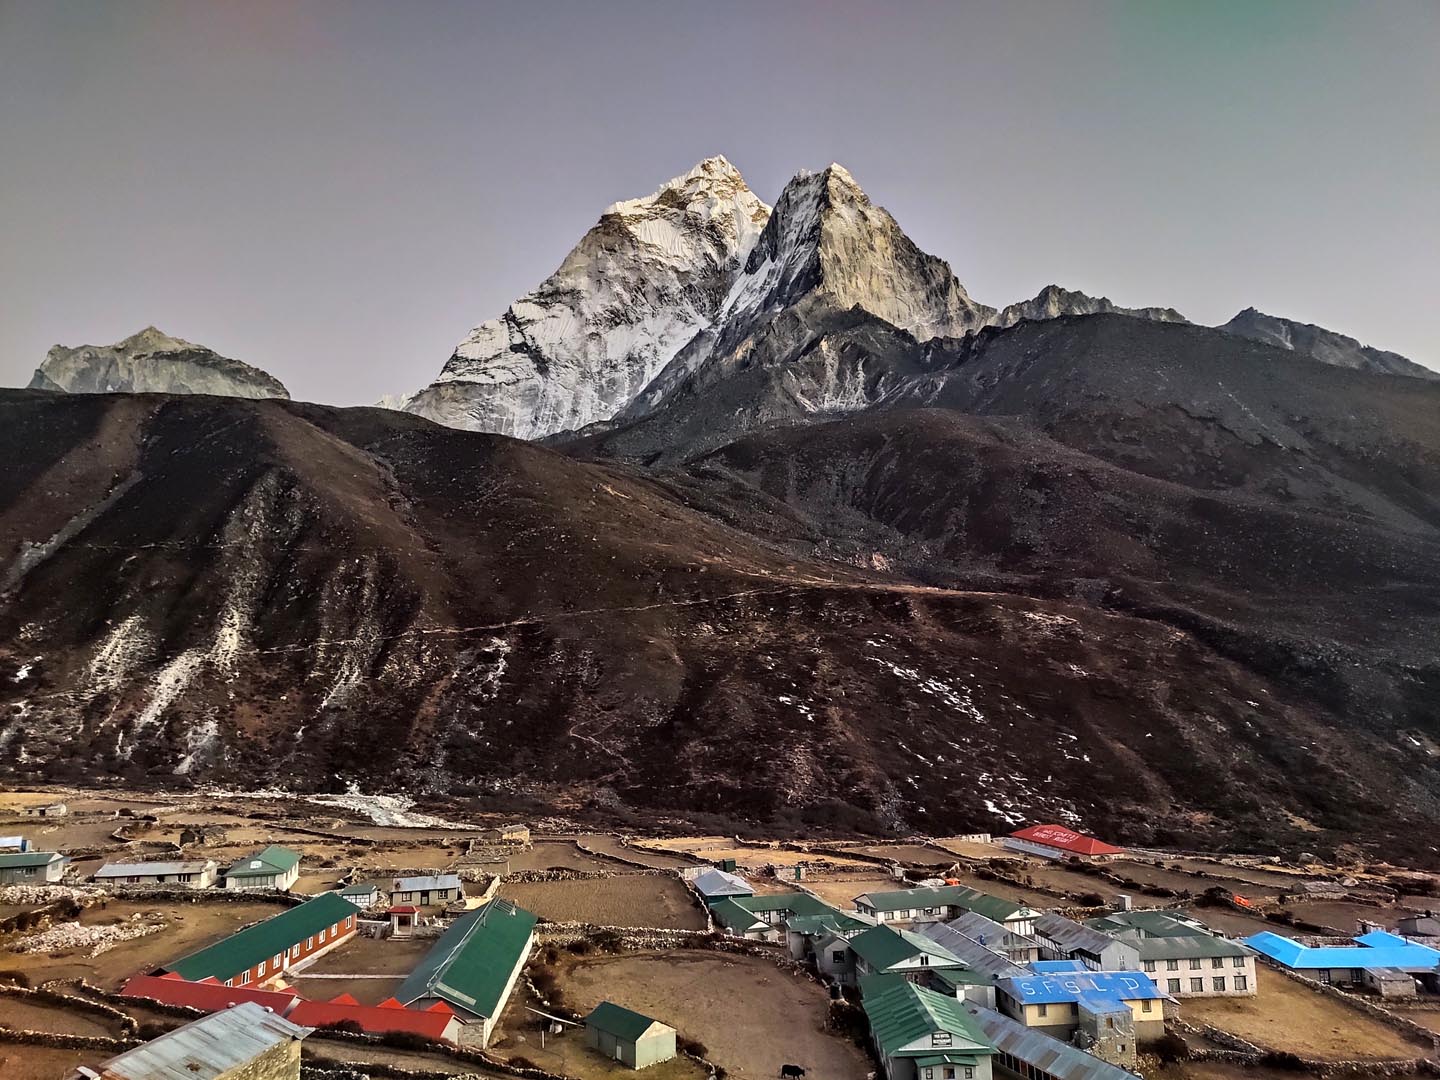 Early morning view of Dingboche with Mt. Amadablam